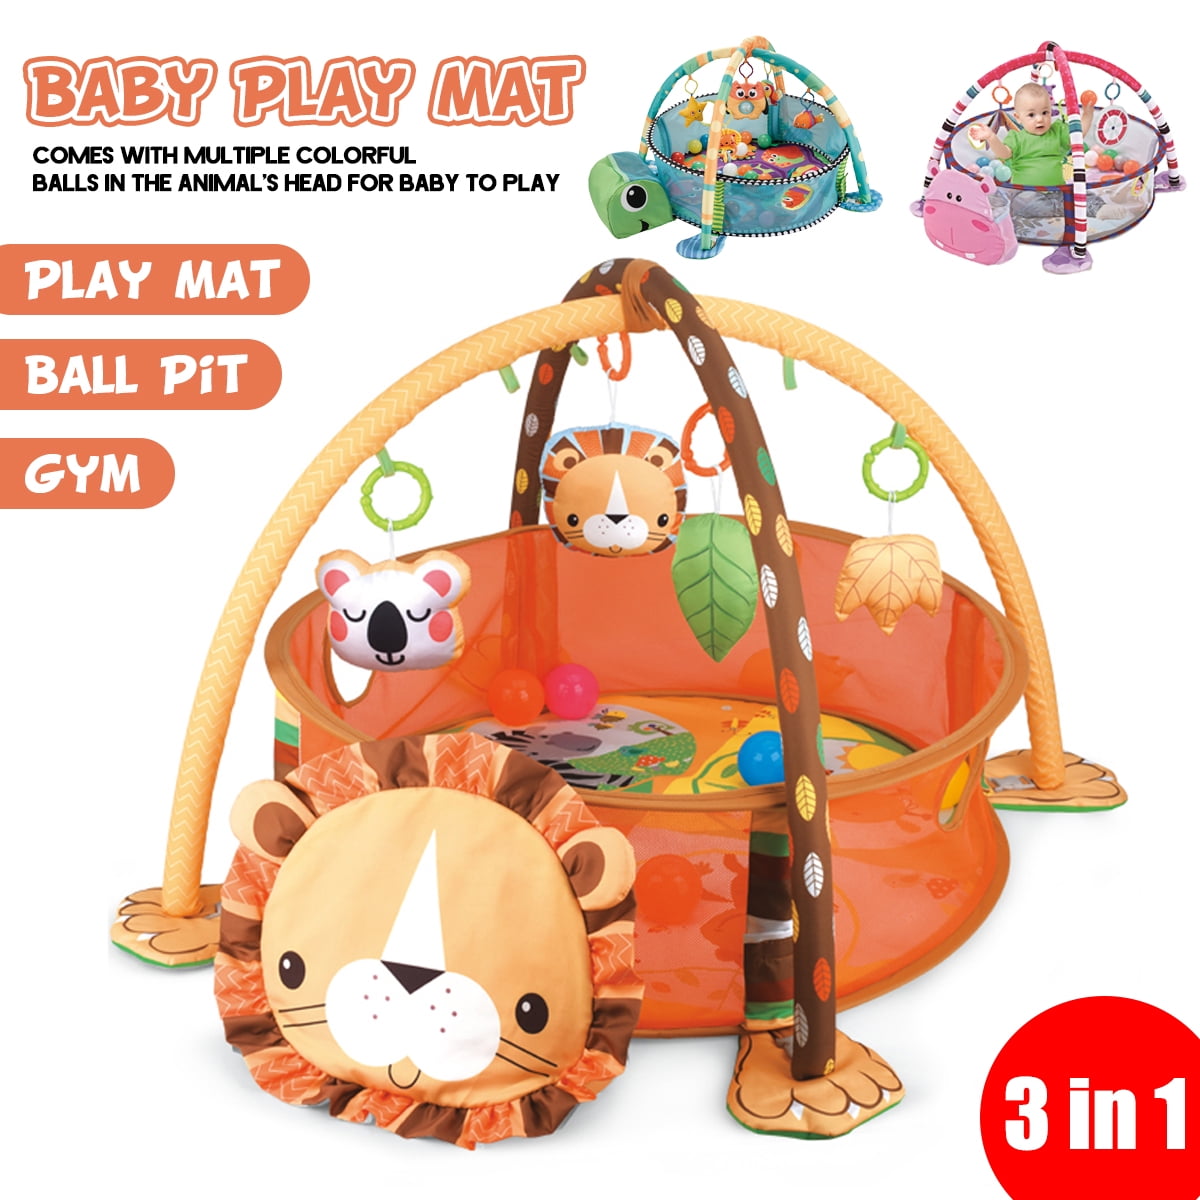 baby crawling activity center